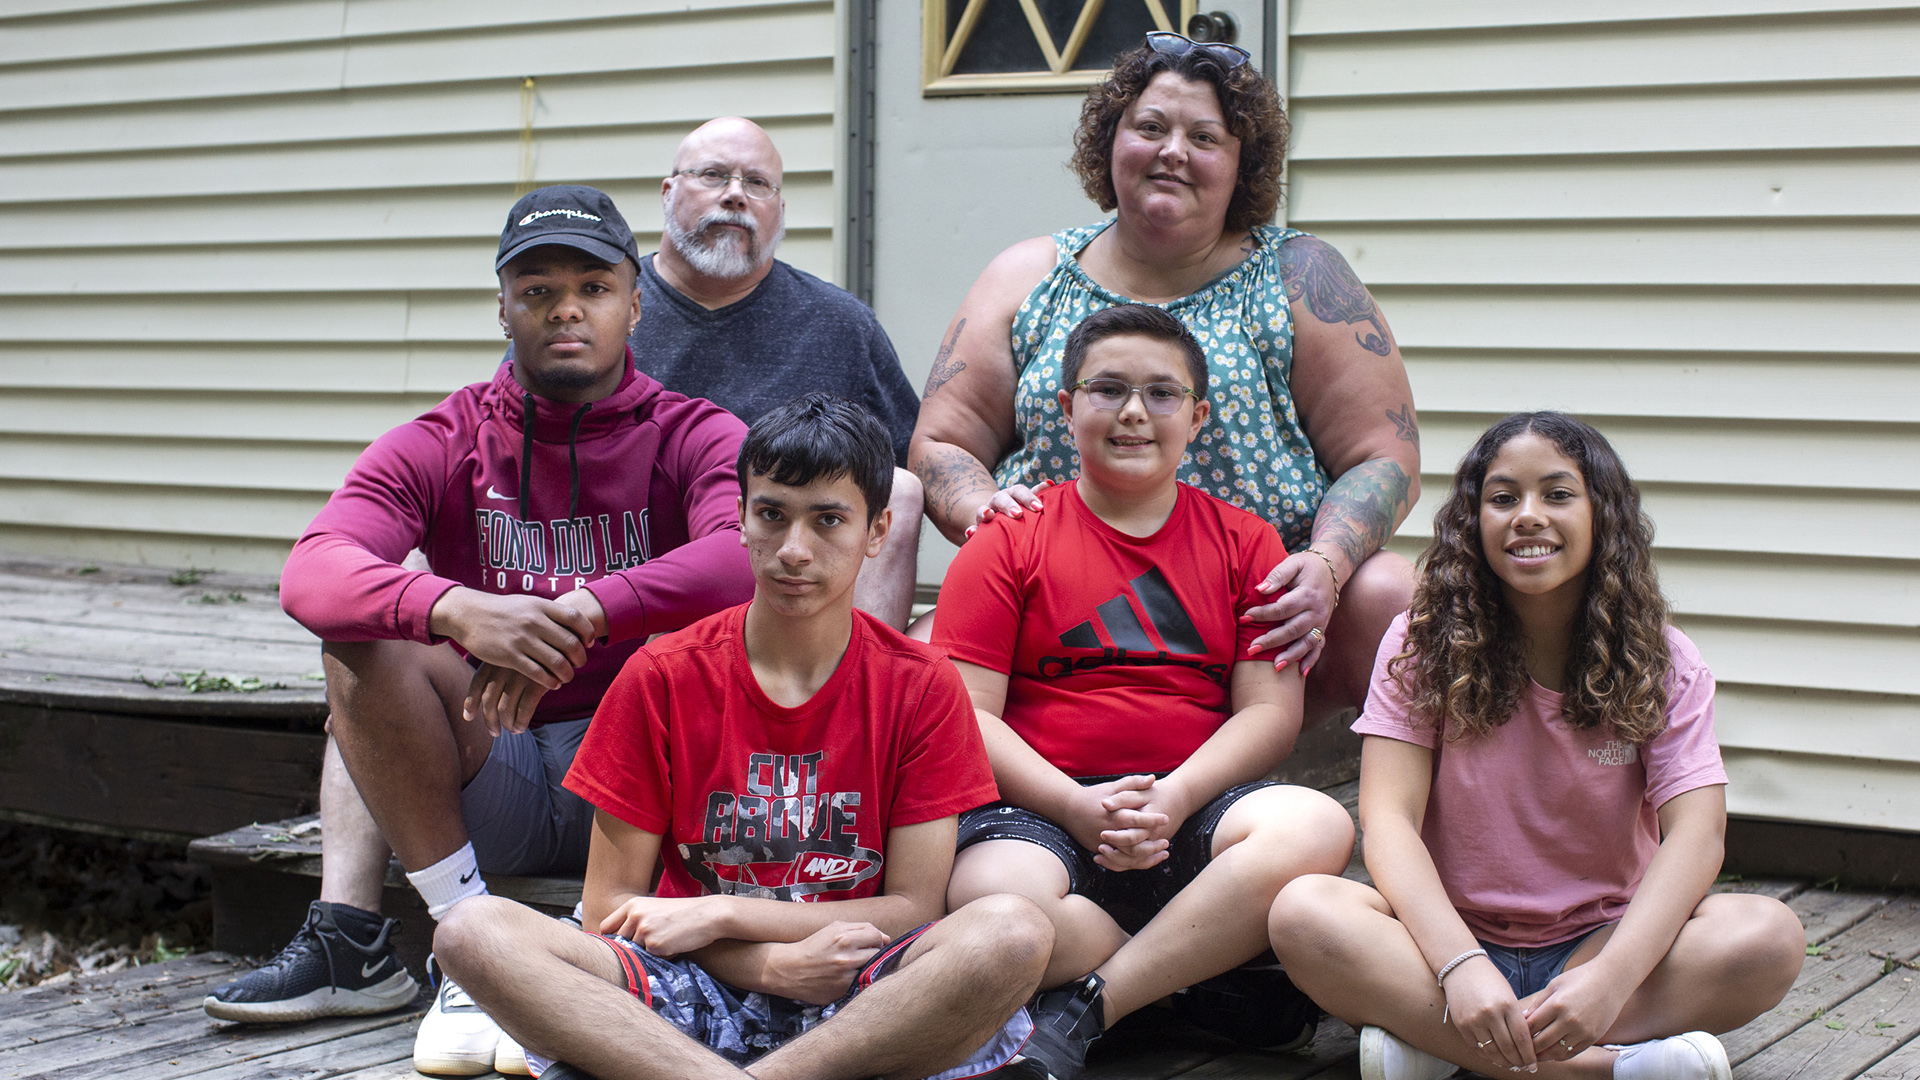 Armond, Dan, Mason, Amy, Cameron and Merri Wempner sit on steps and deck outside the exterior door of a house.